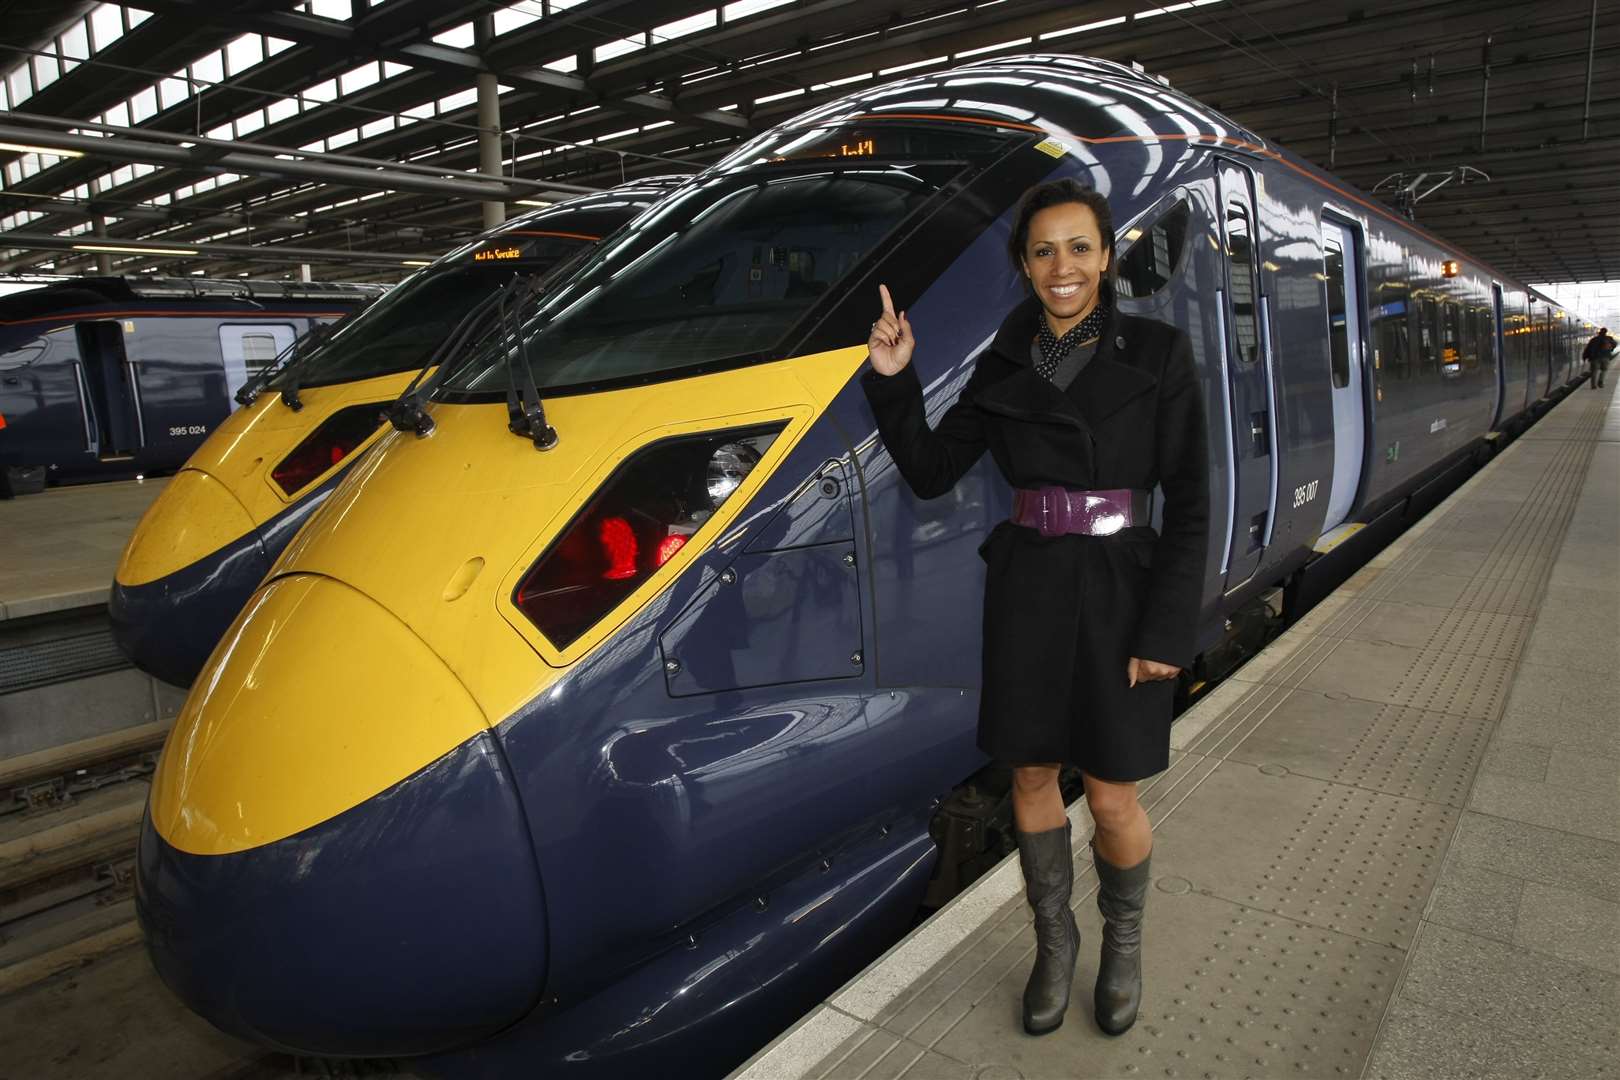 The launch of the high speed rail service through Kent included naming its No.1 train Dame Kelly Holmes